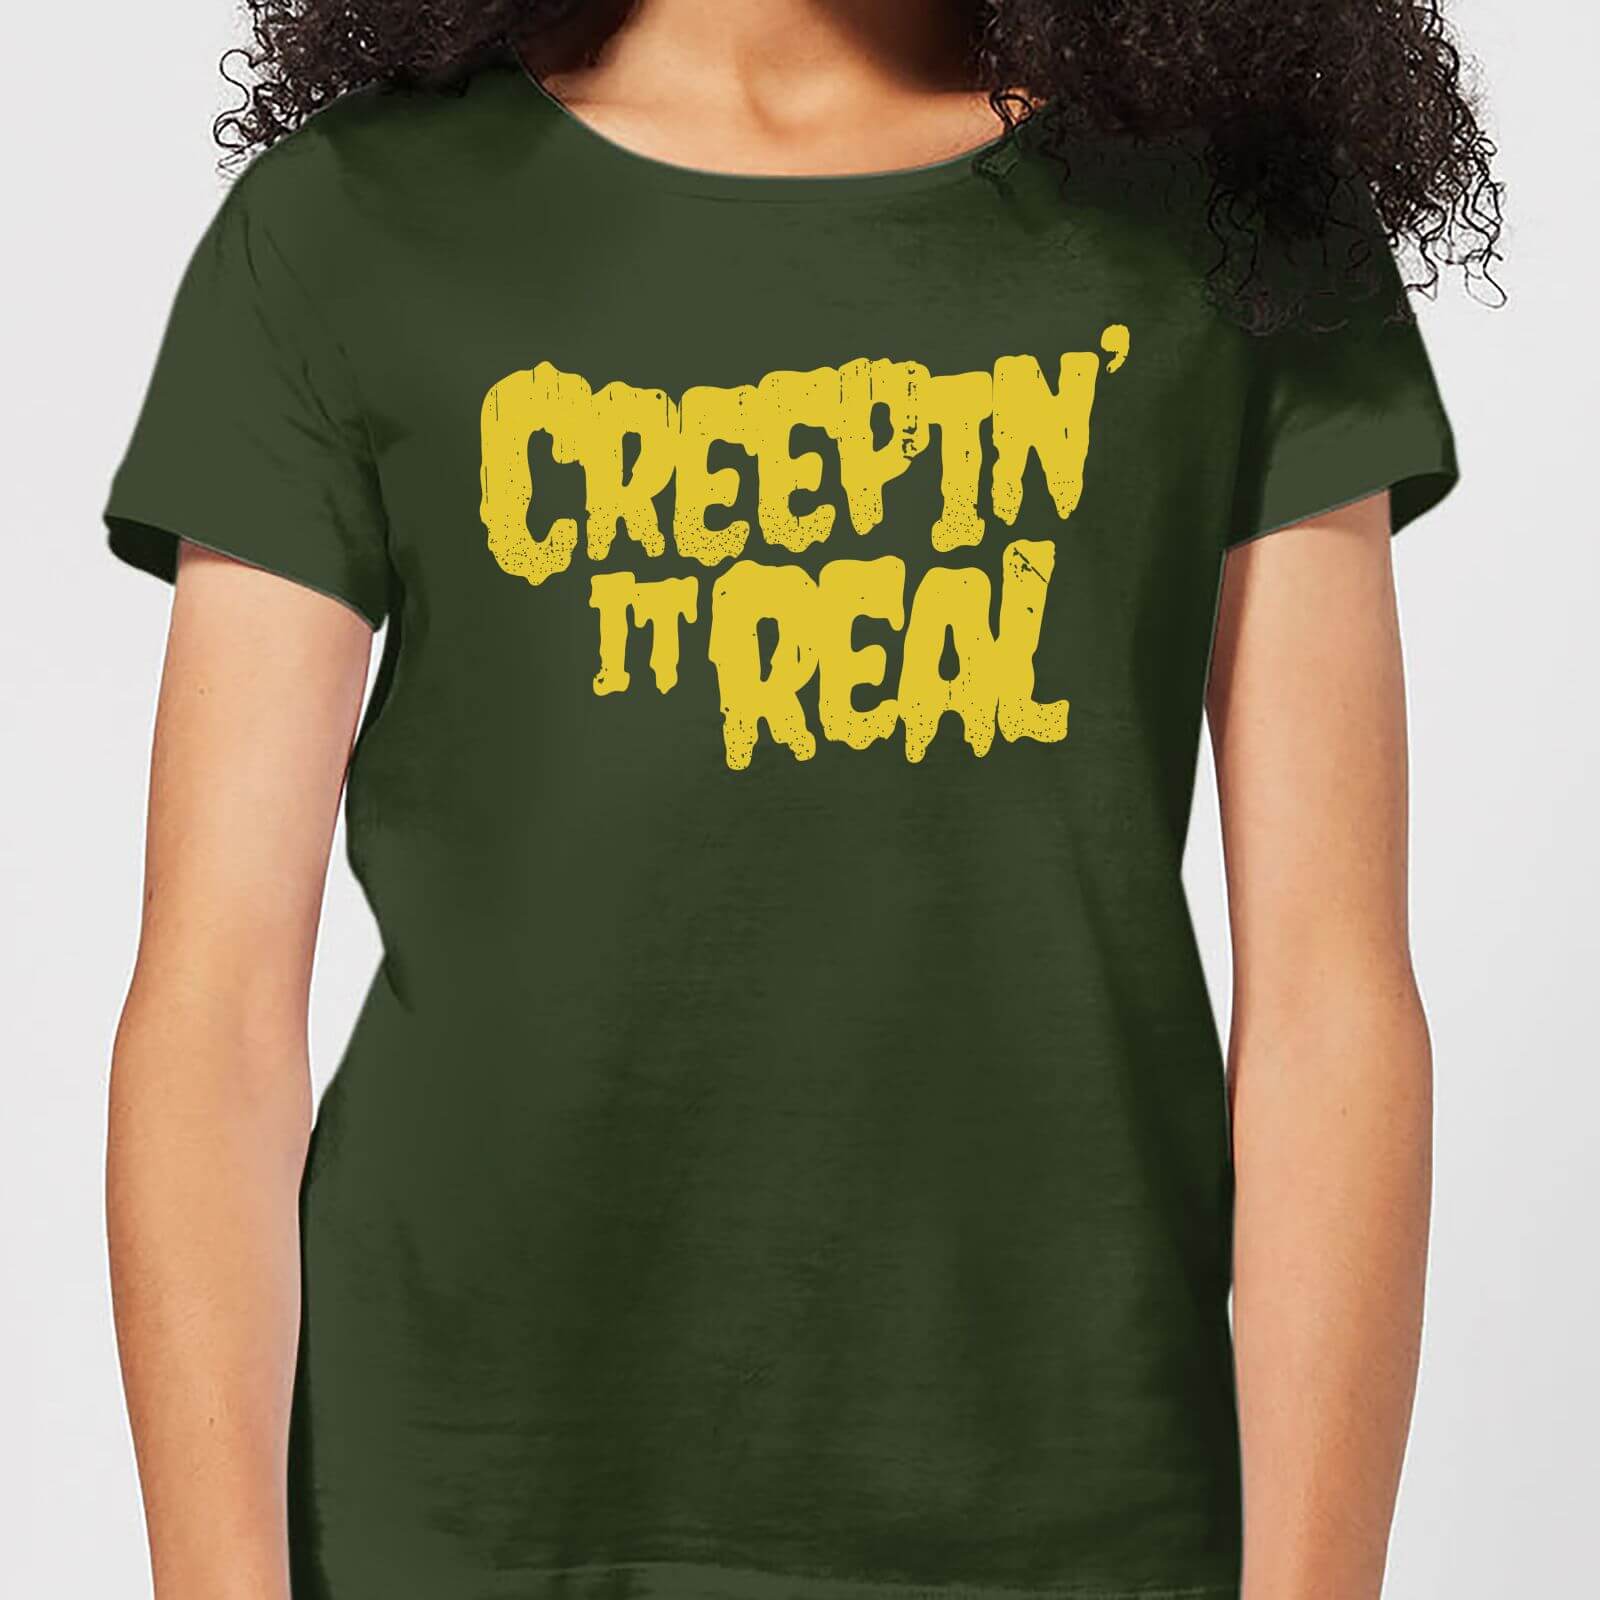 Creepin it Real Women's T-Shirt - Forest Green - S - Forest Green